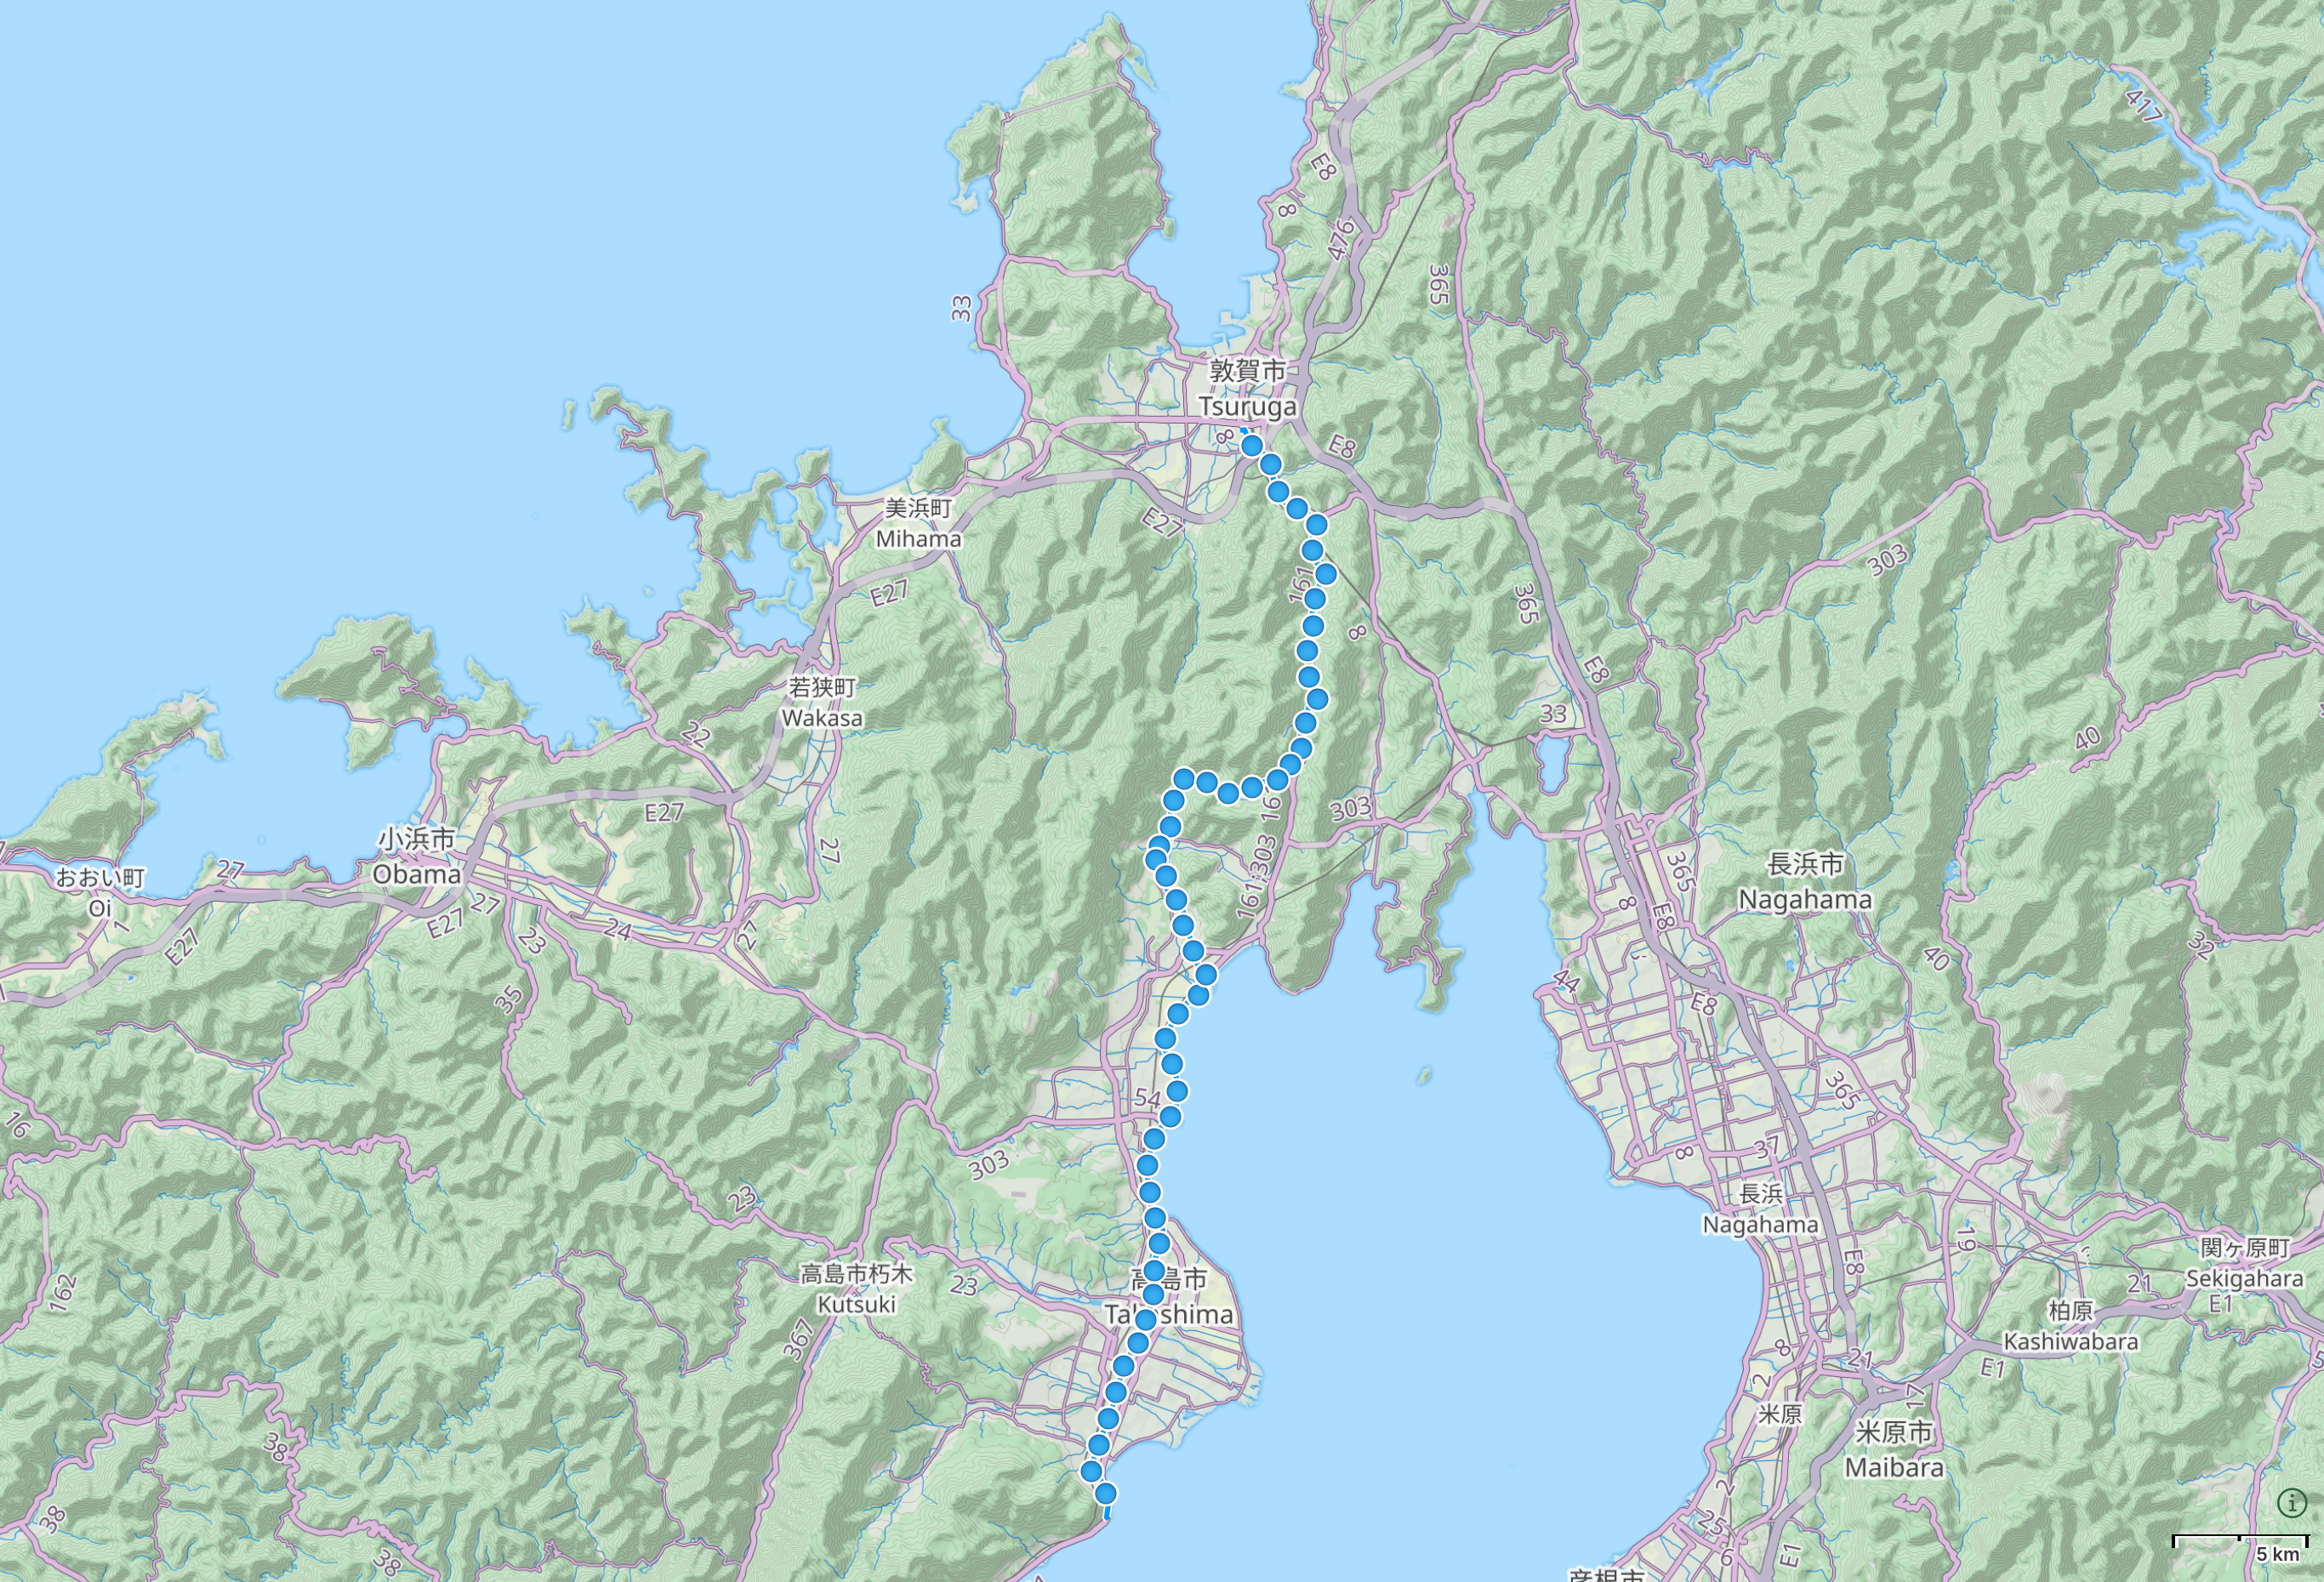 Map of the Lake Biwa/Sea of Japan area with author’s route between Shirahige Shrine and Tsuruga highlighted.